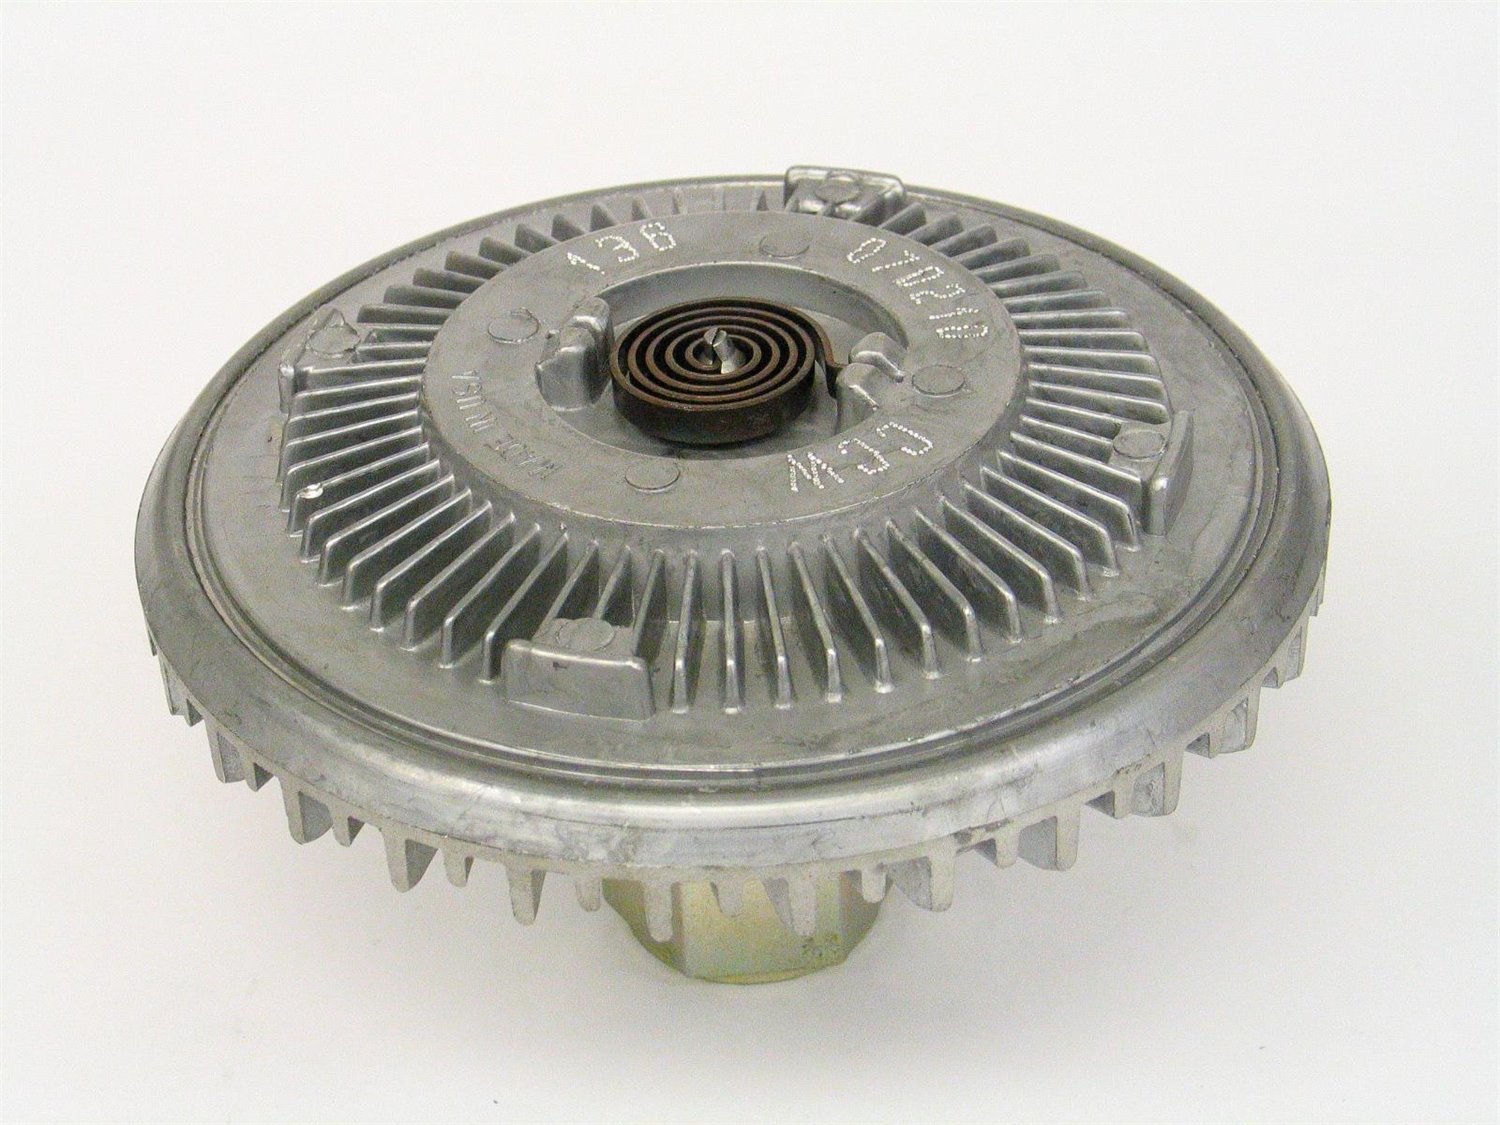 Standard Duty Thermal Fan Clutch for 1997-2003 Chevy S10/GMC Sonoma 2.2L L4